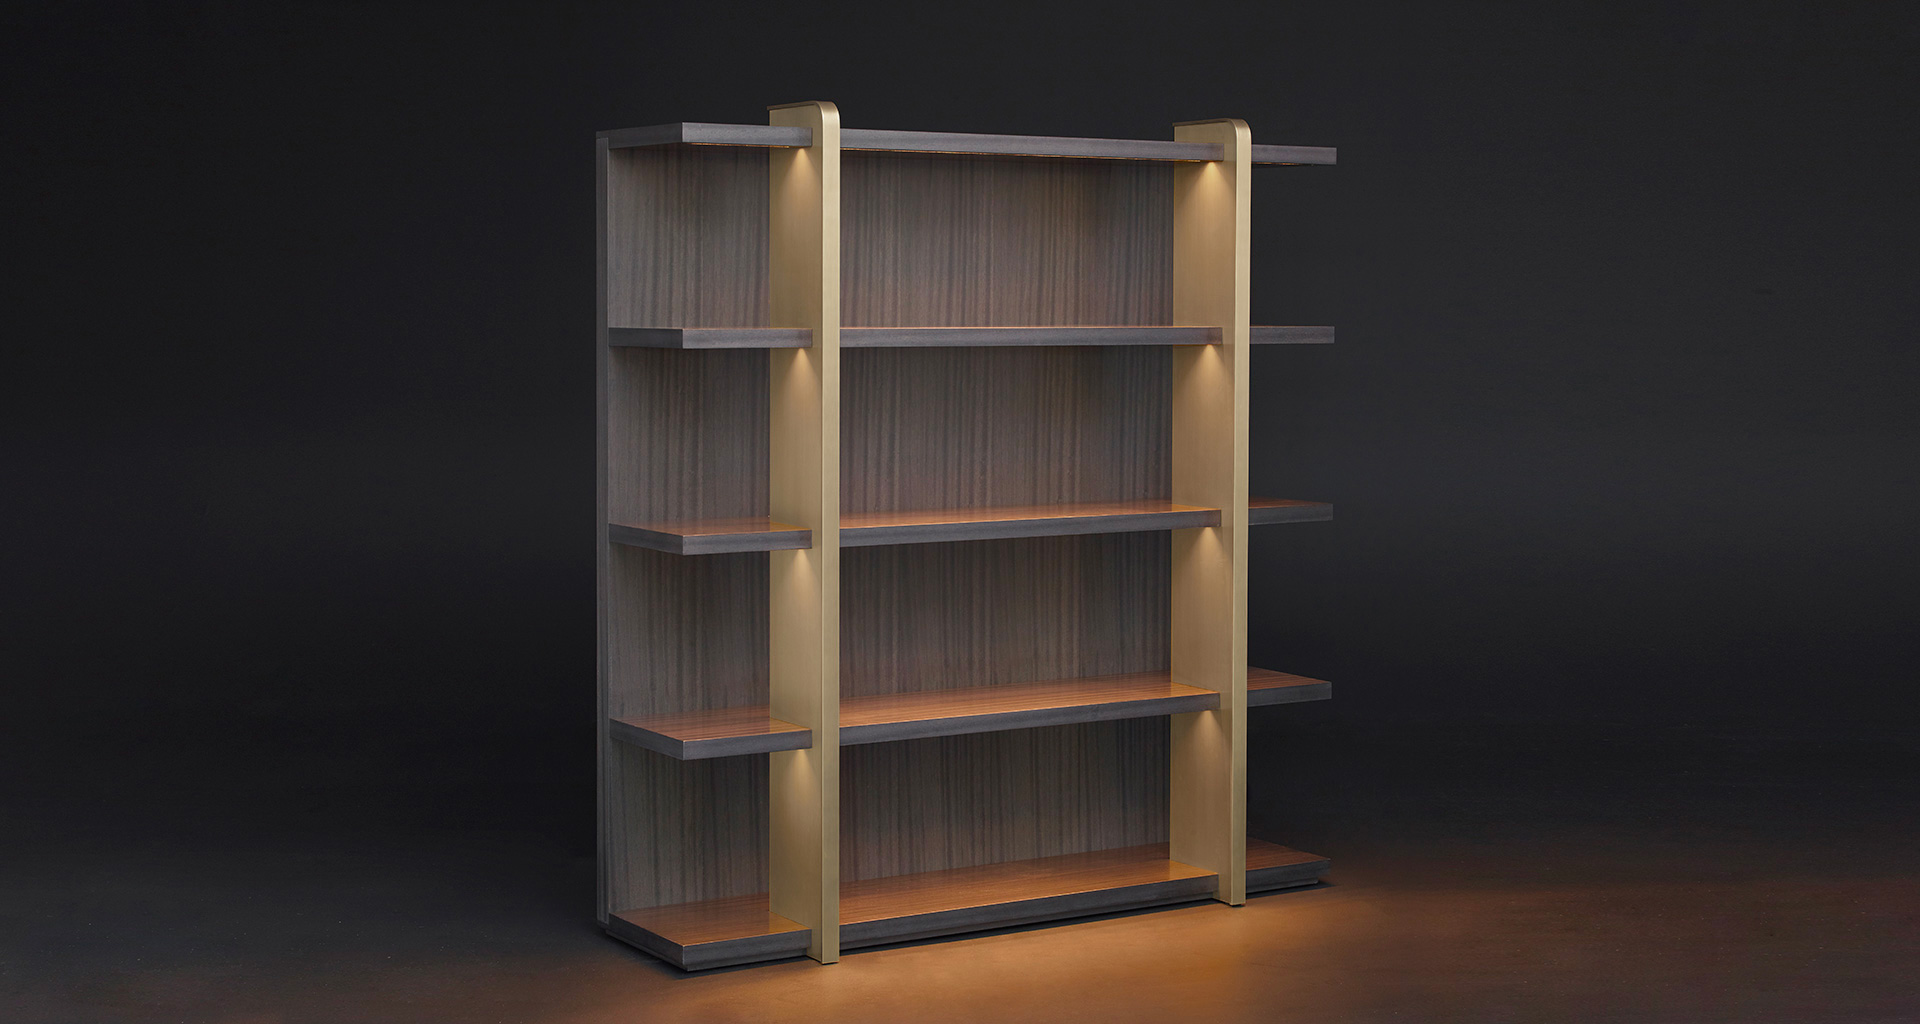 Nisha is a wooden bookcase with bronze supports from the Promemoria's Night Tales collection | Promemoria